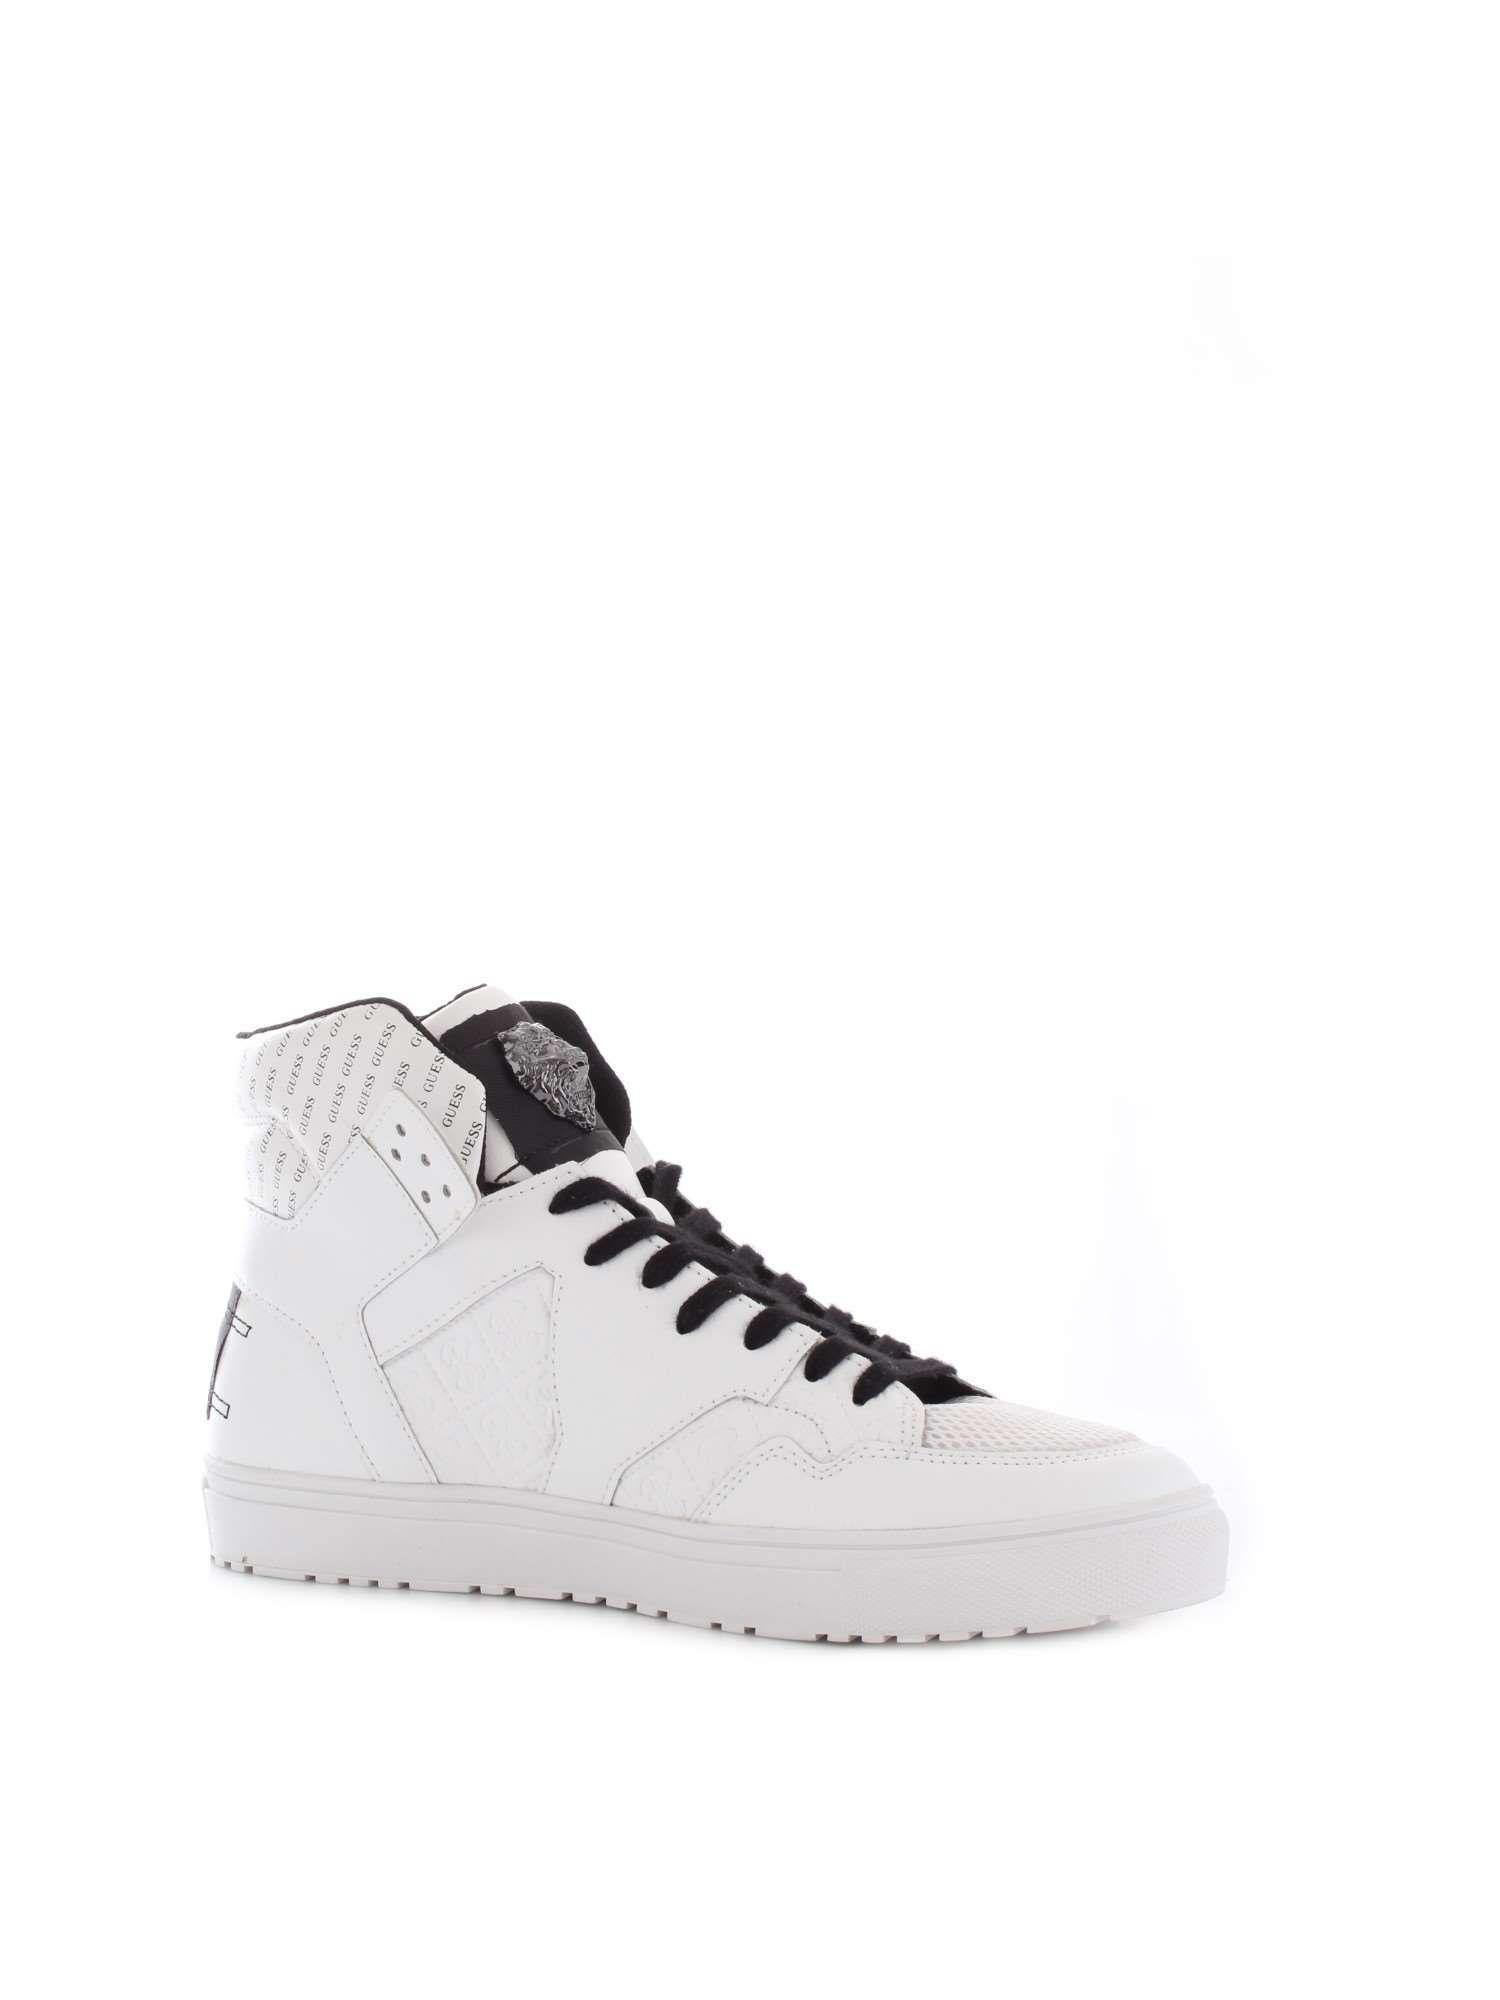 Guess White Leather Hi Top Sneakers in White for Men - Lyst